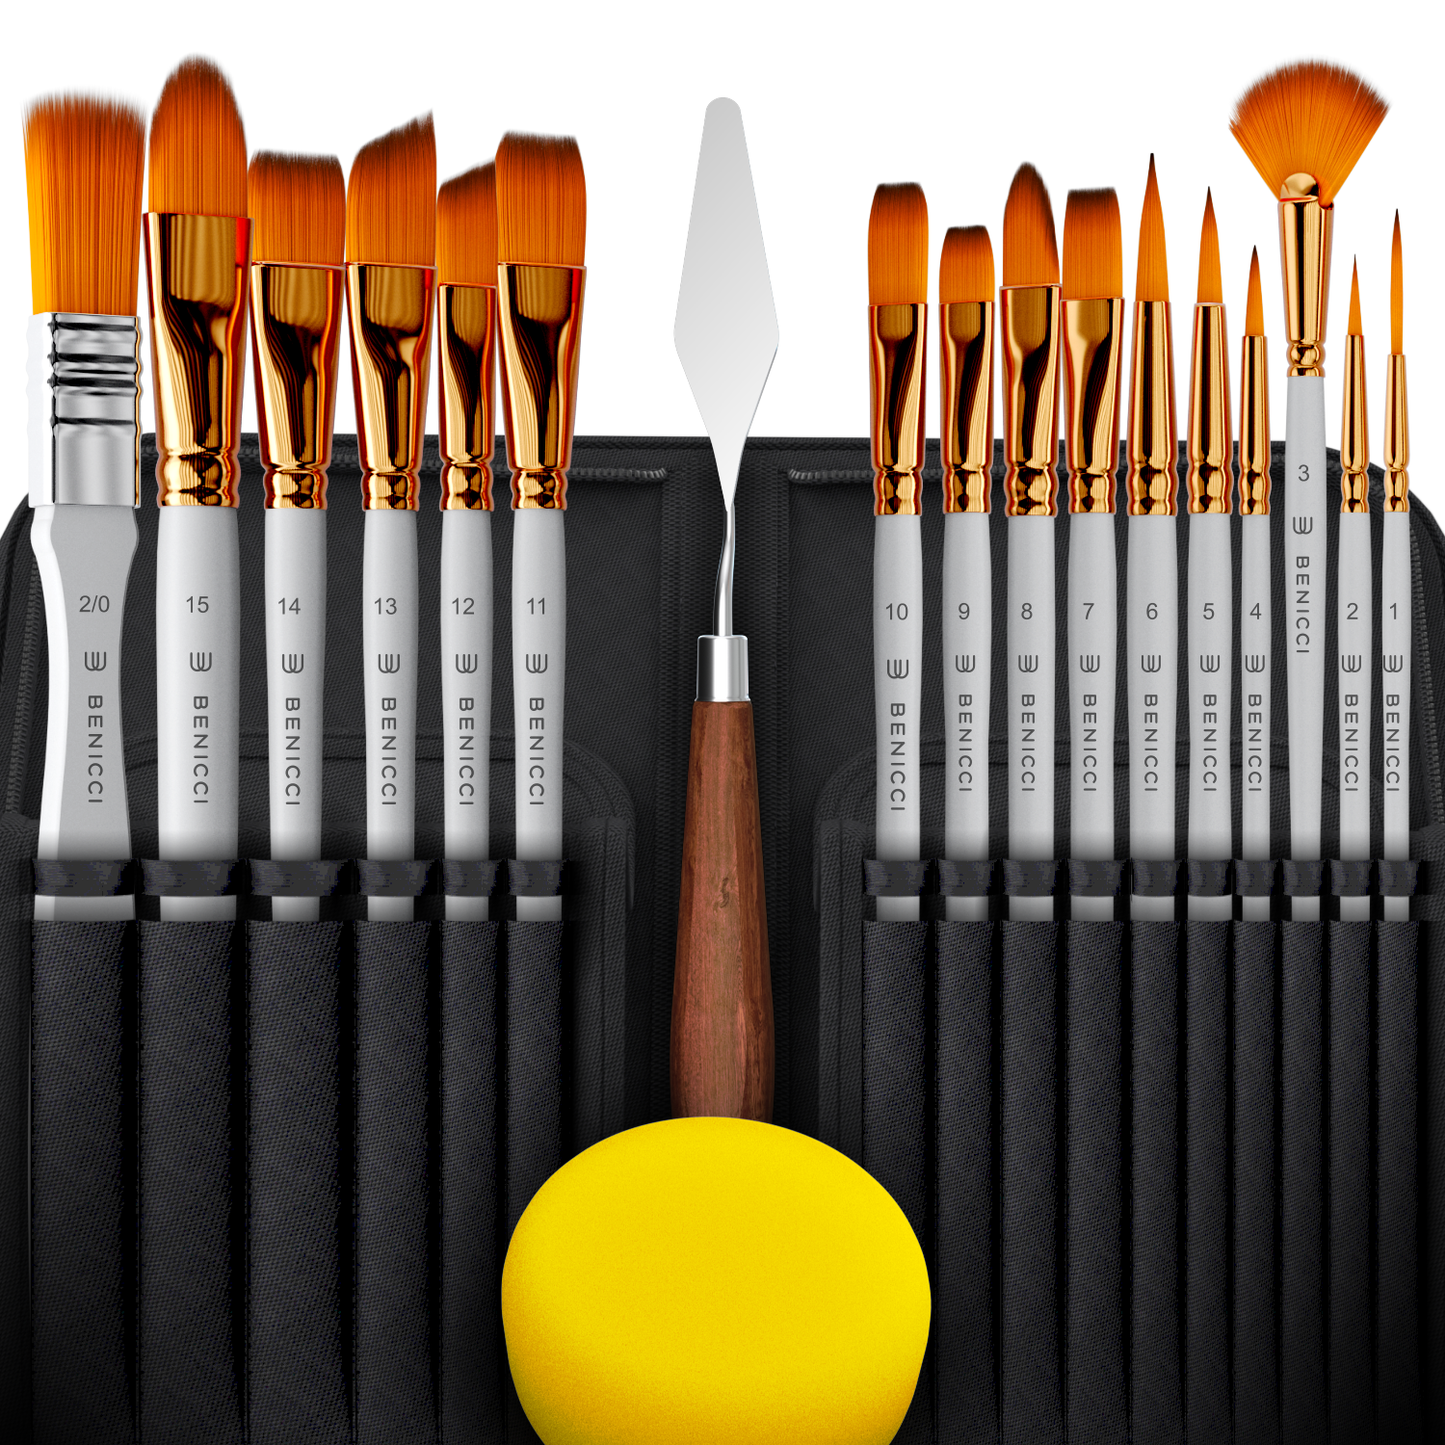 Artist Paint Brush Set of 16 - Includes Spatula Palette Knife, Sponge & Organizing Case - Premium Paint Brushes for Acrylic Painting, Watercolor, Oil - Perfect for Kids, Adults or Professionals